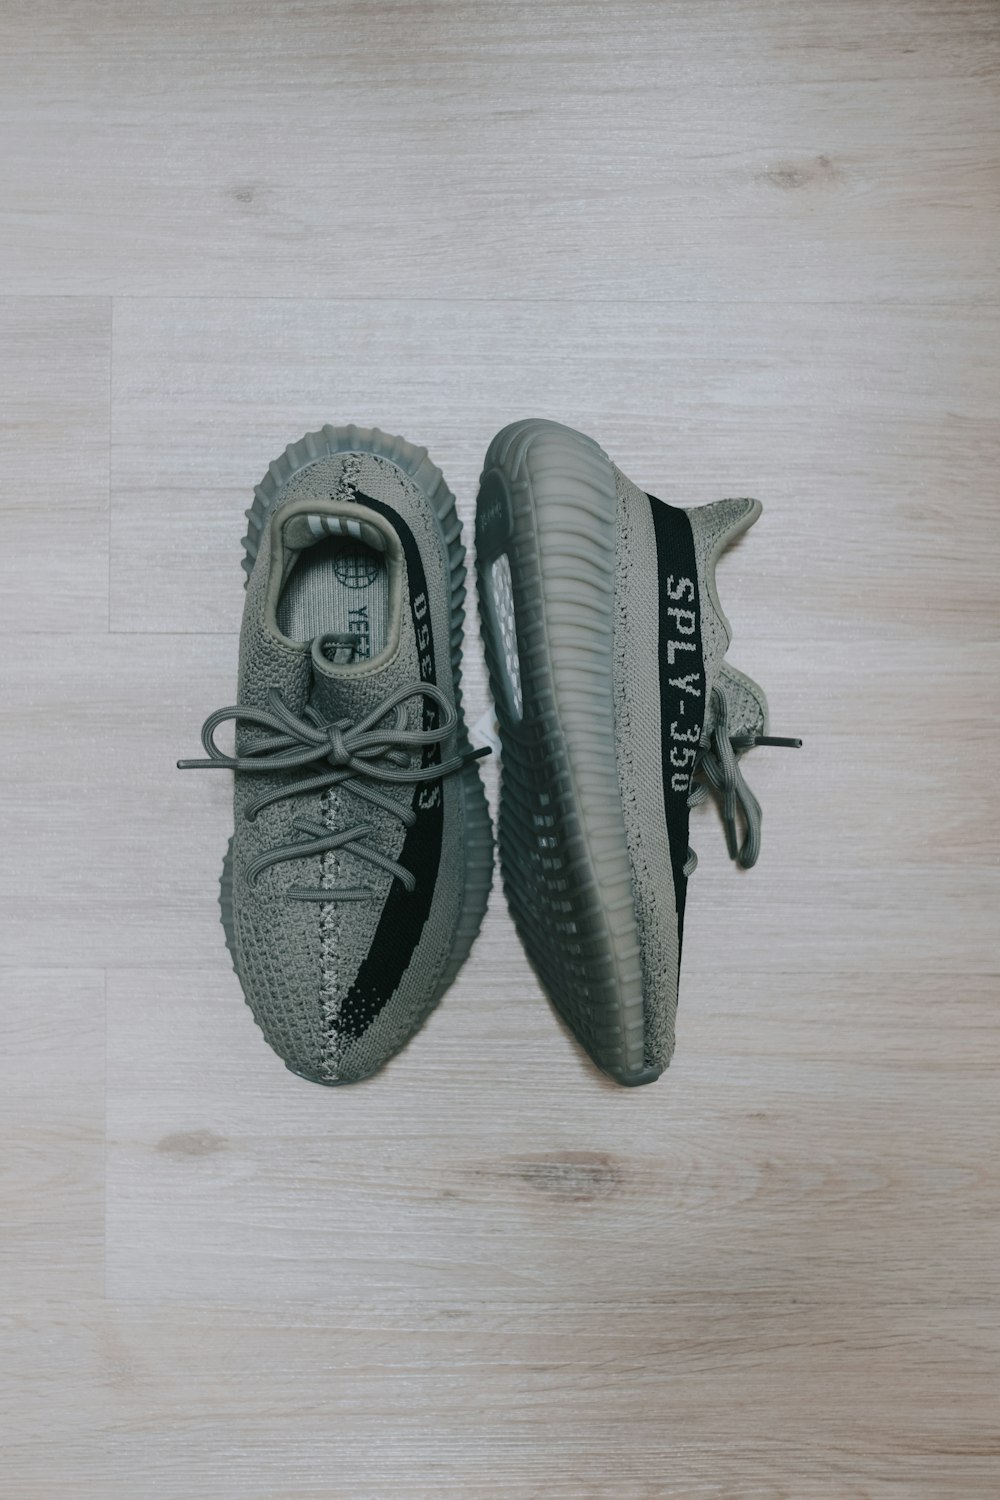 a pair of grey sneakers sitting on top of a wooden floor